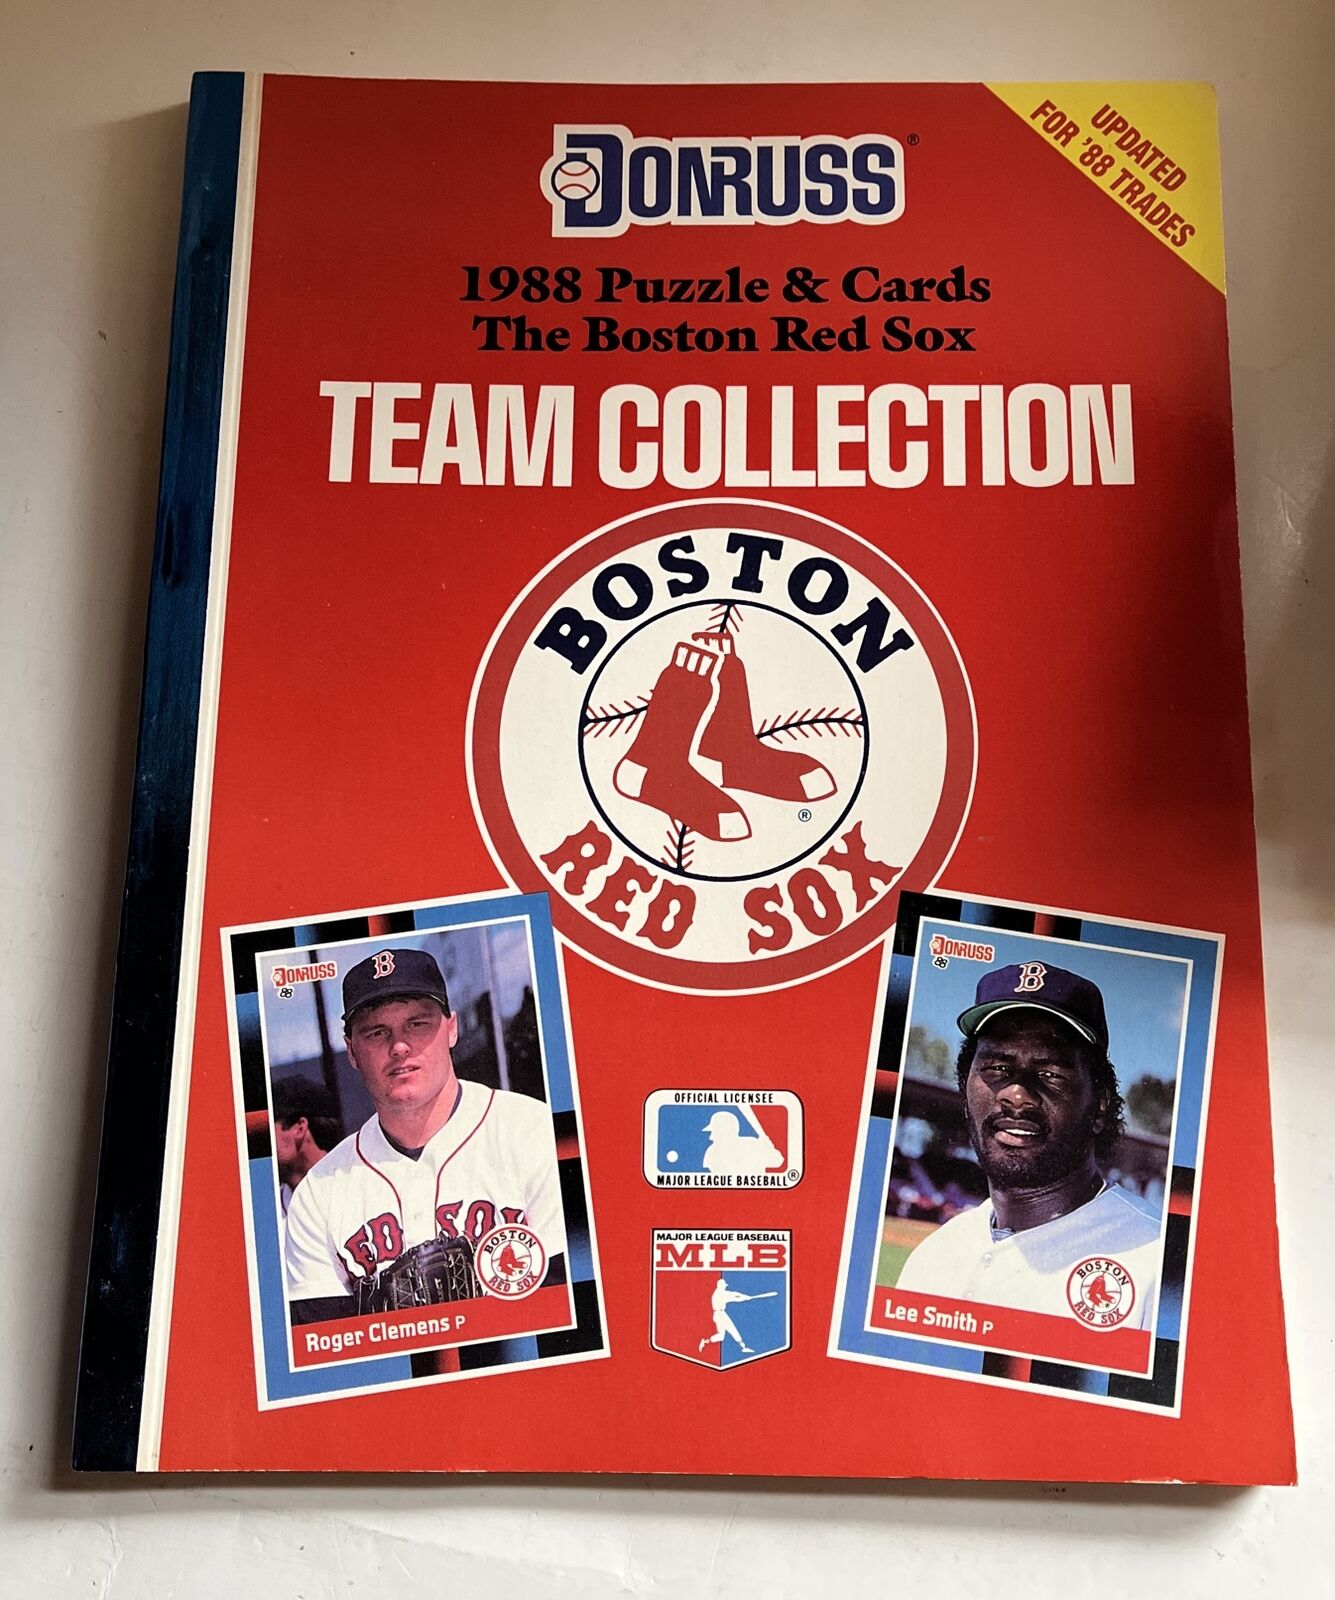 Donruss 1988 Uncut Baseball Cards & Puzzle Team Collection Boston Red Sox-